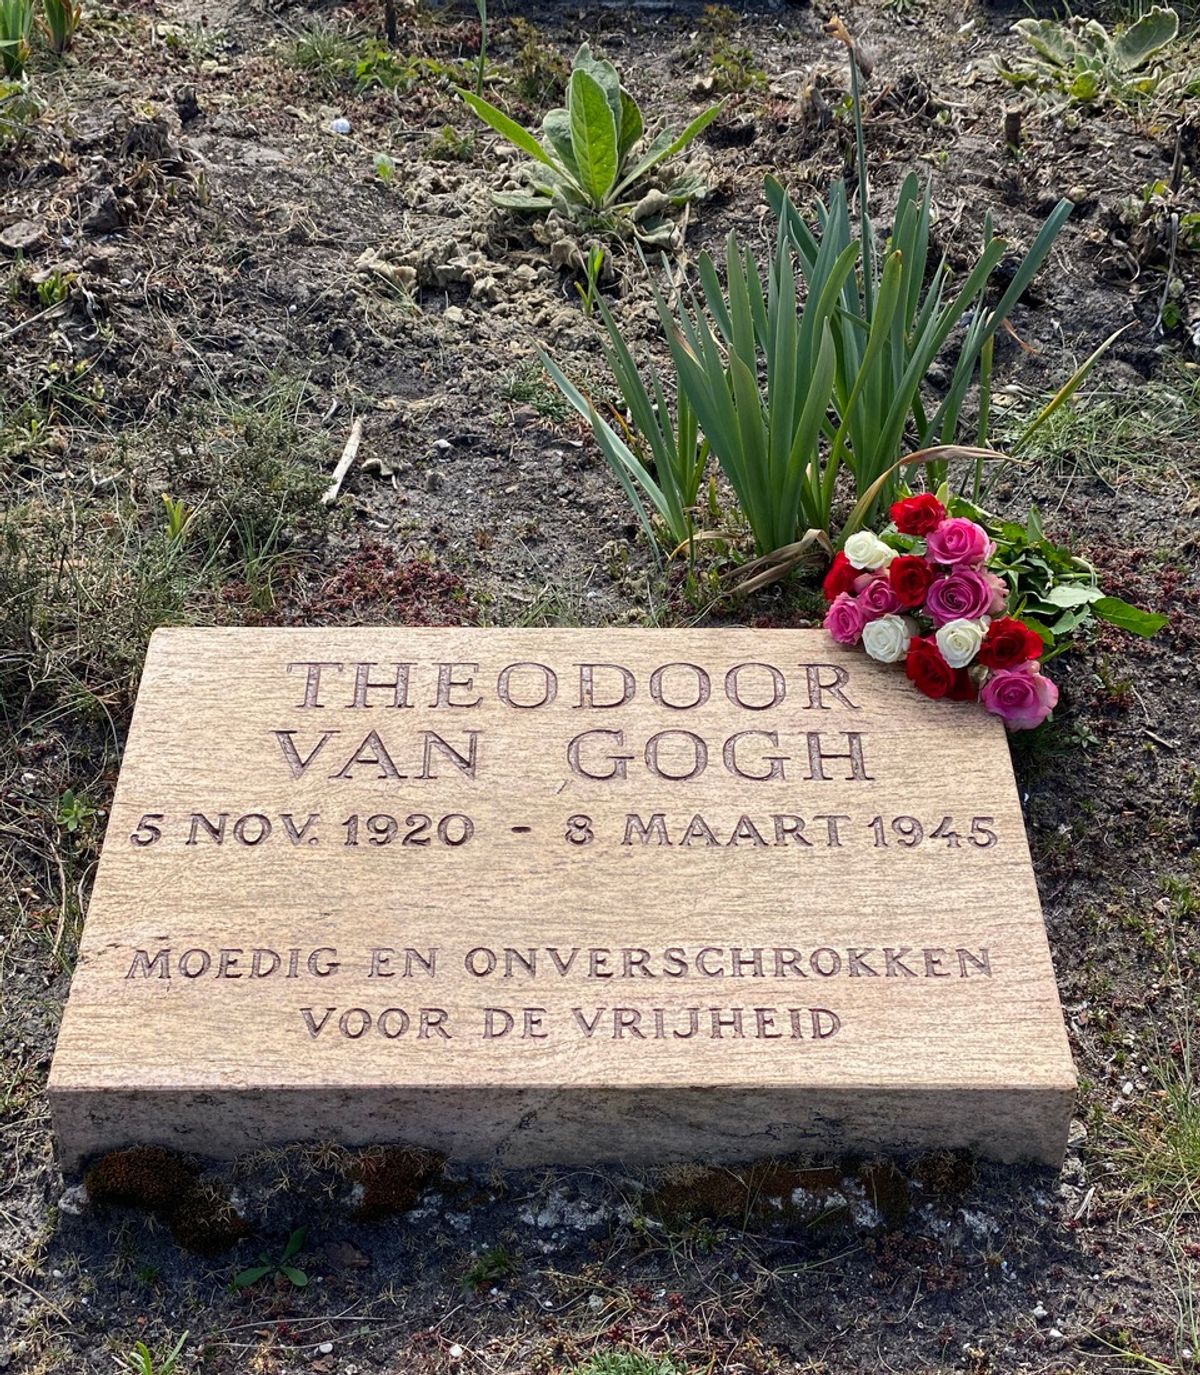 The grave of Theodoor van Gogh (1920-45) with roses, Field of Honour Cemetery, Overveen, Netherlands Courtesy of Willem van Gogh, Amsterdam